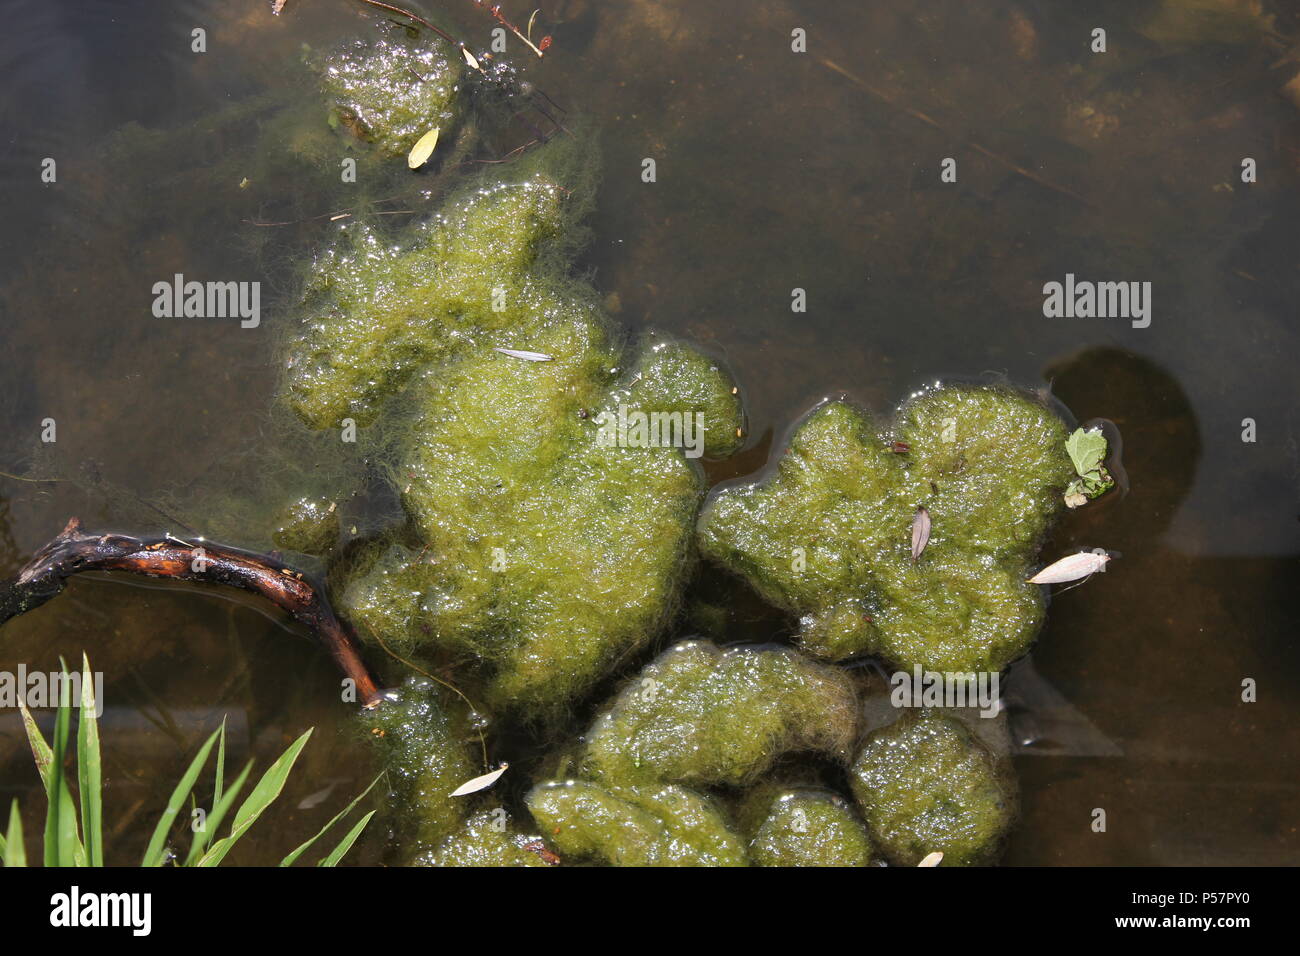 Green water plants floating on the surface of the pond. Stock Photo